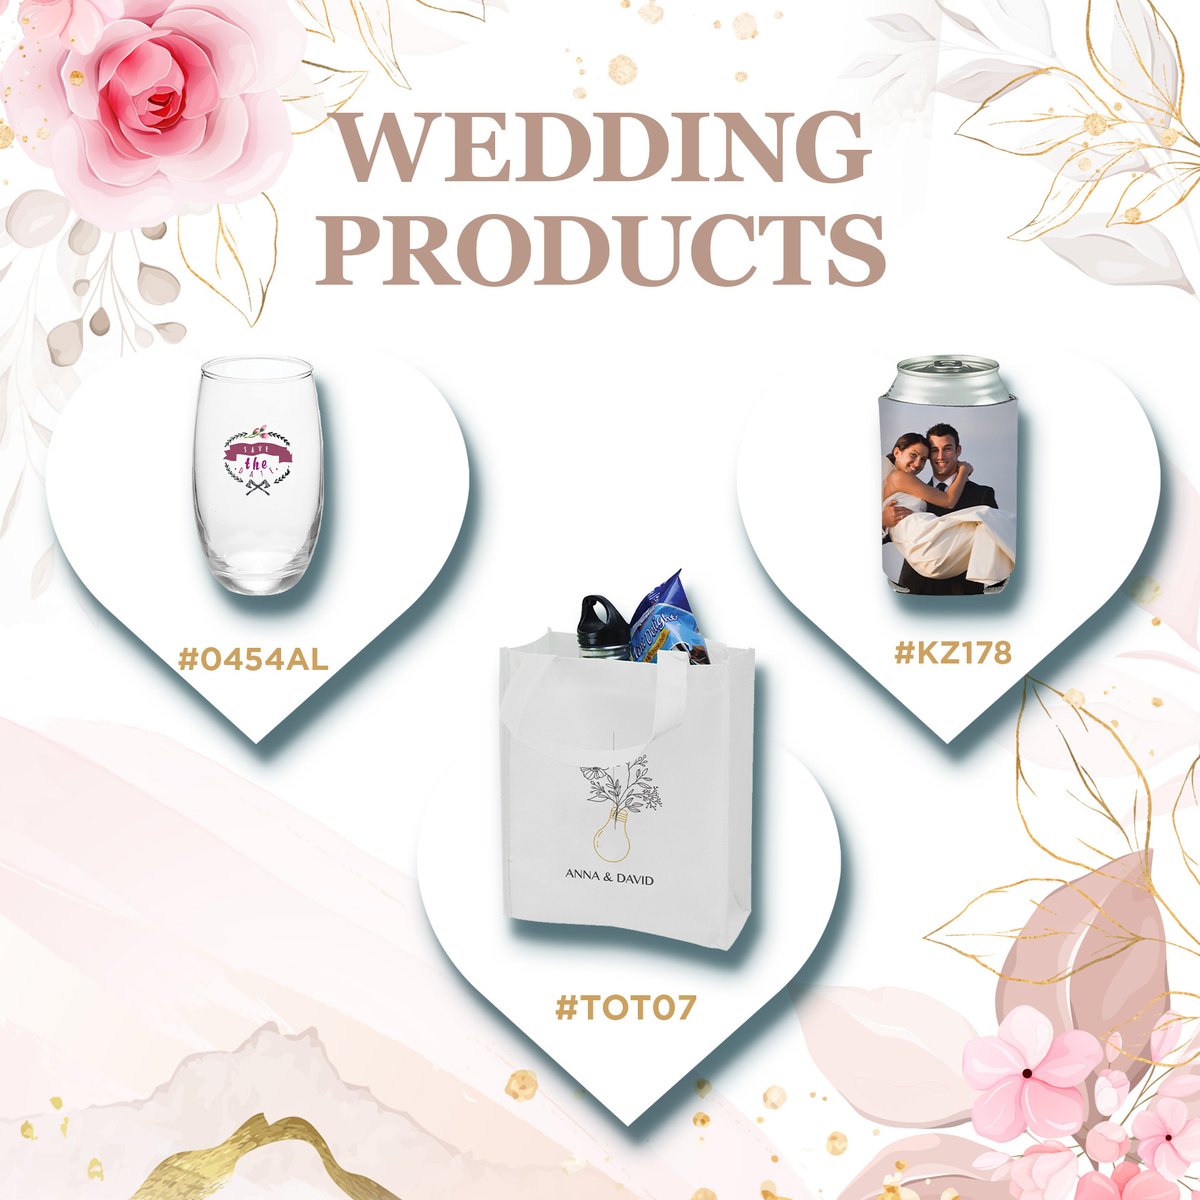 Elevate your BIG day! Impress your guests with personalized, unforgettable pieces they'll cherish forever. Start shopping now to add that extra touch of magic to your special day! hubs.ly/Q02w9xQY0

#weddingfavors #personalizedfavors #yourbigday